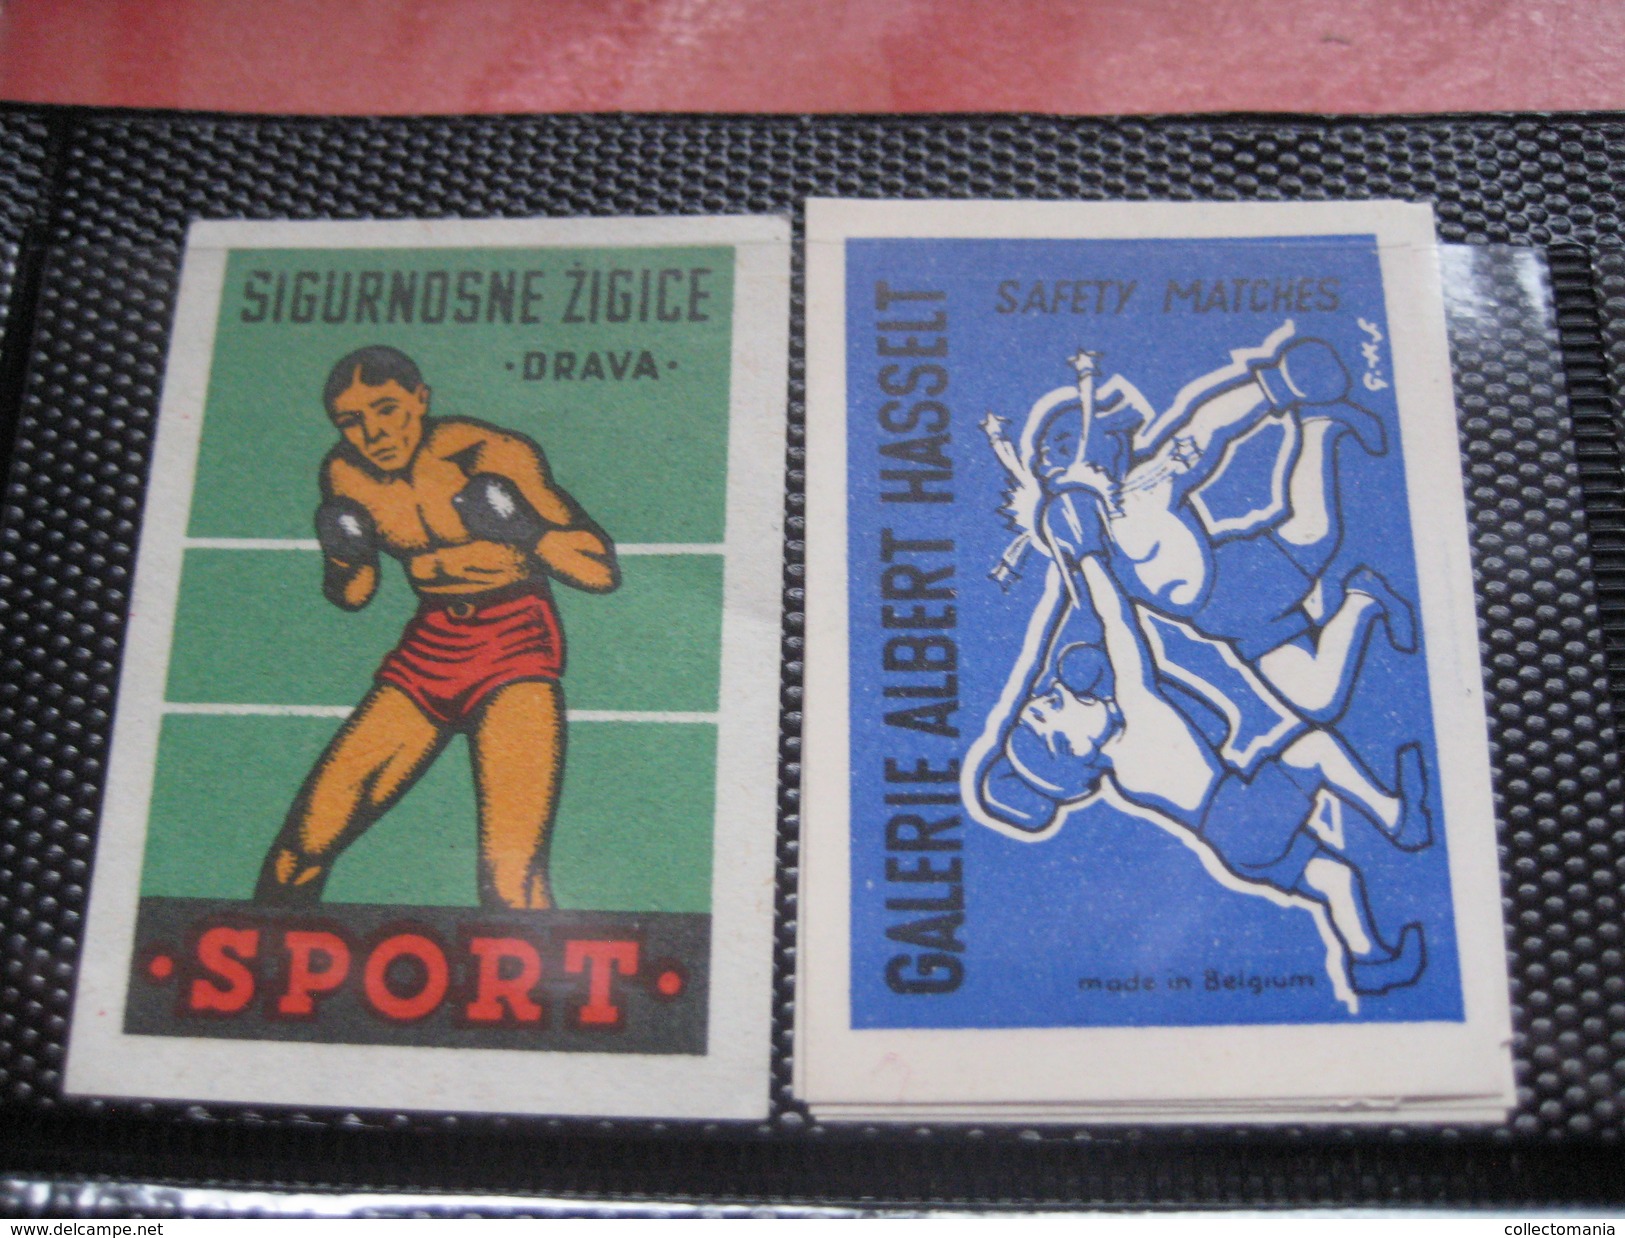 many cards, all photograped: photos, tradecards, cards, labels,  LUTTE 1907 poster stamp; Siam kick boxing ; ALBERT MAES